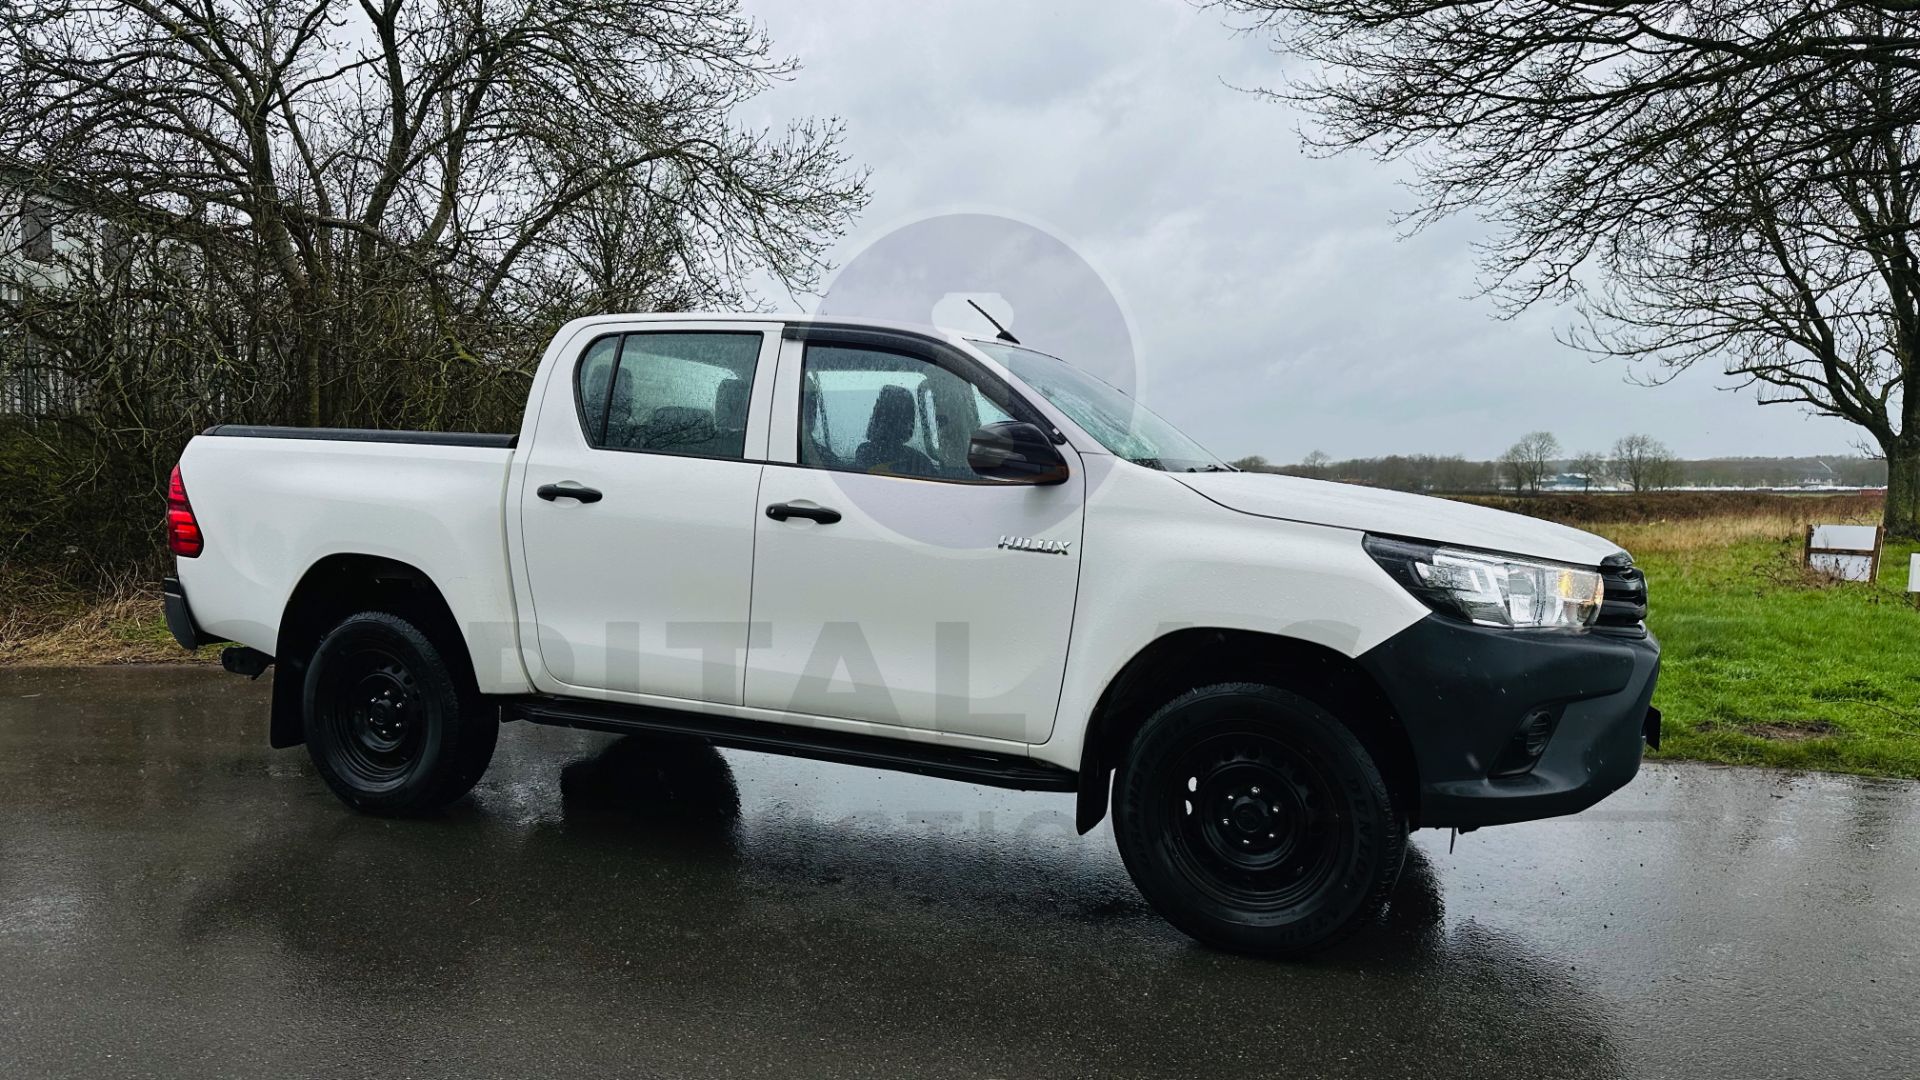 TOYOTA HILUX *DOUBLE CAB PICK-UP* (2020 - EURO 6) 2.4 D-4D - AUTO STOP/START *AIR CON* (1 OWNER) - Image 5 of 48